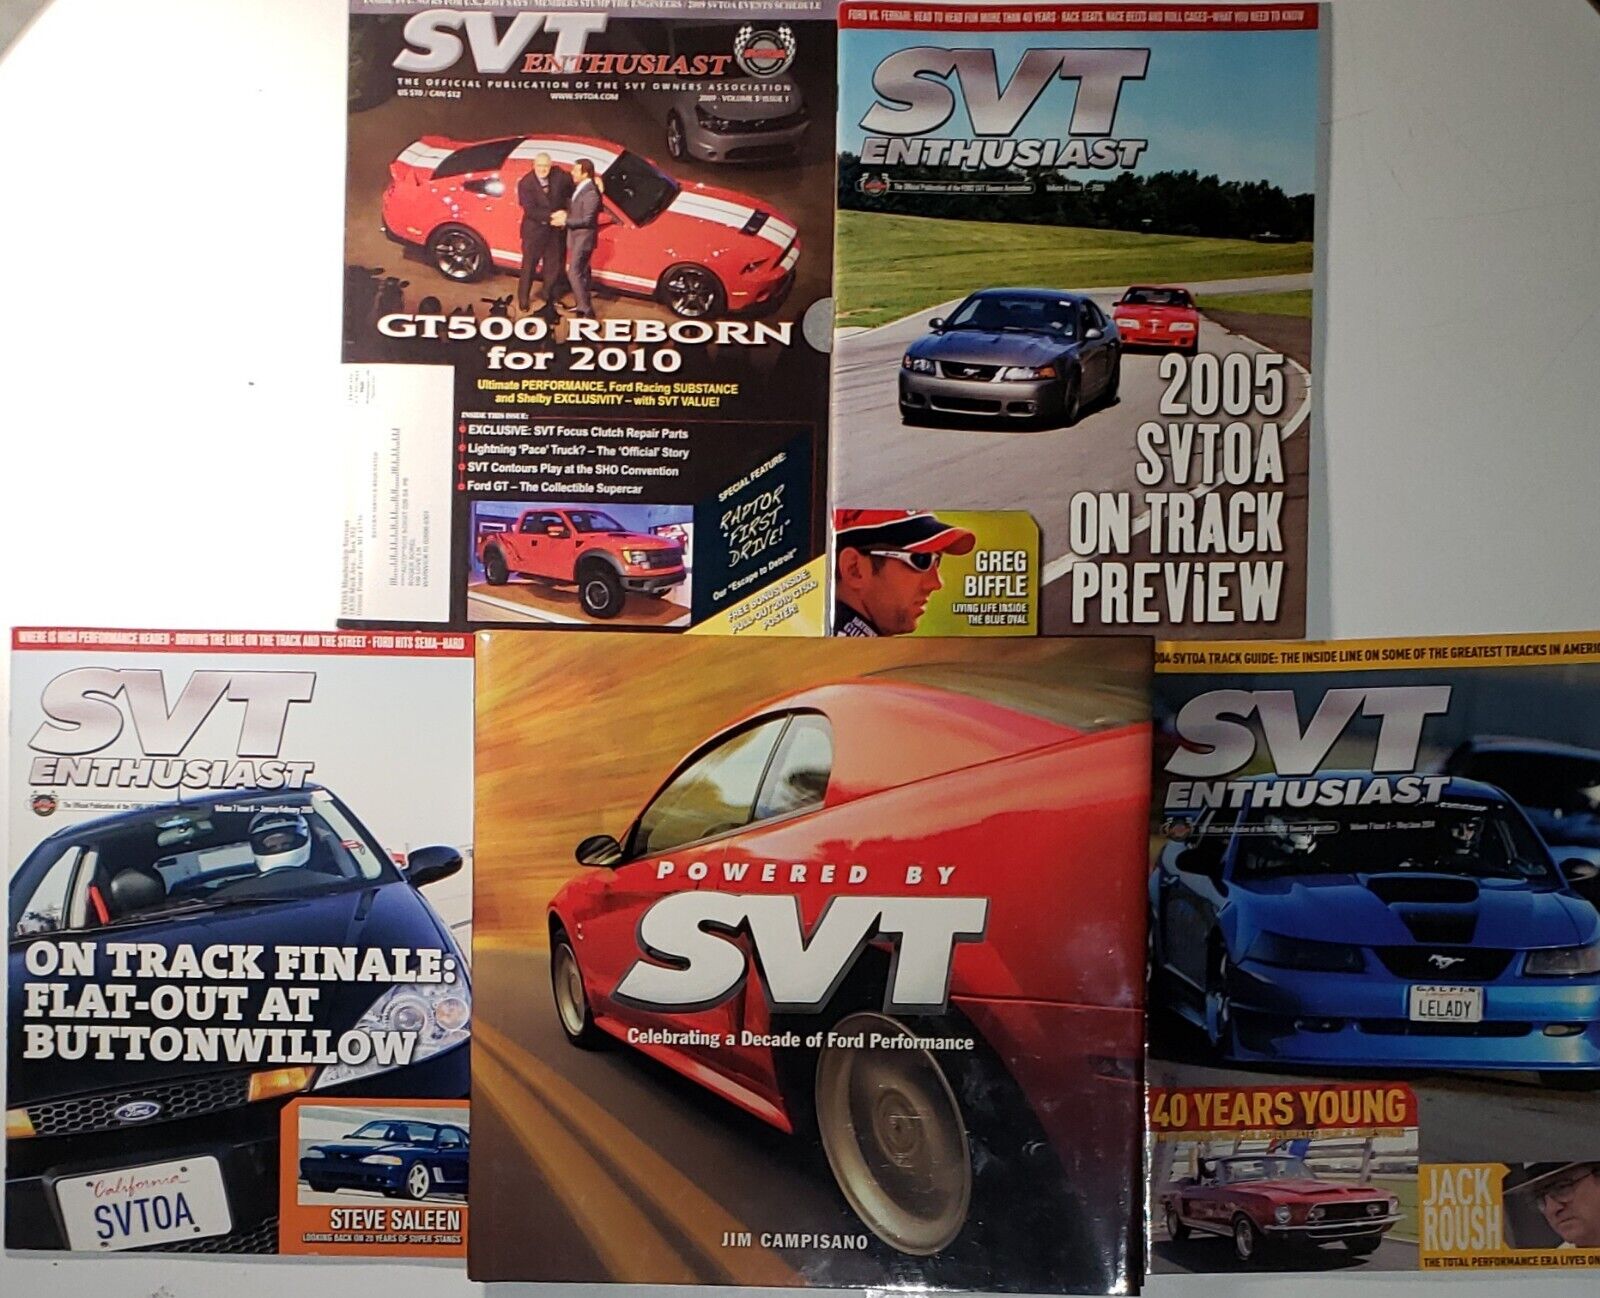 POWERED BY SVT: Celebrating a Decade of Ford Performance/4 SVT ENTHUSIAST Books